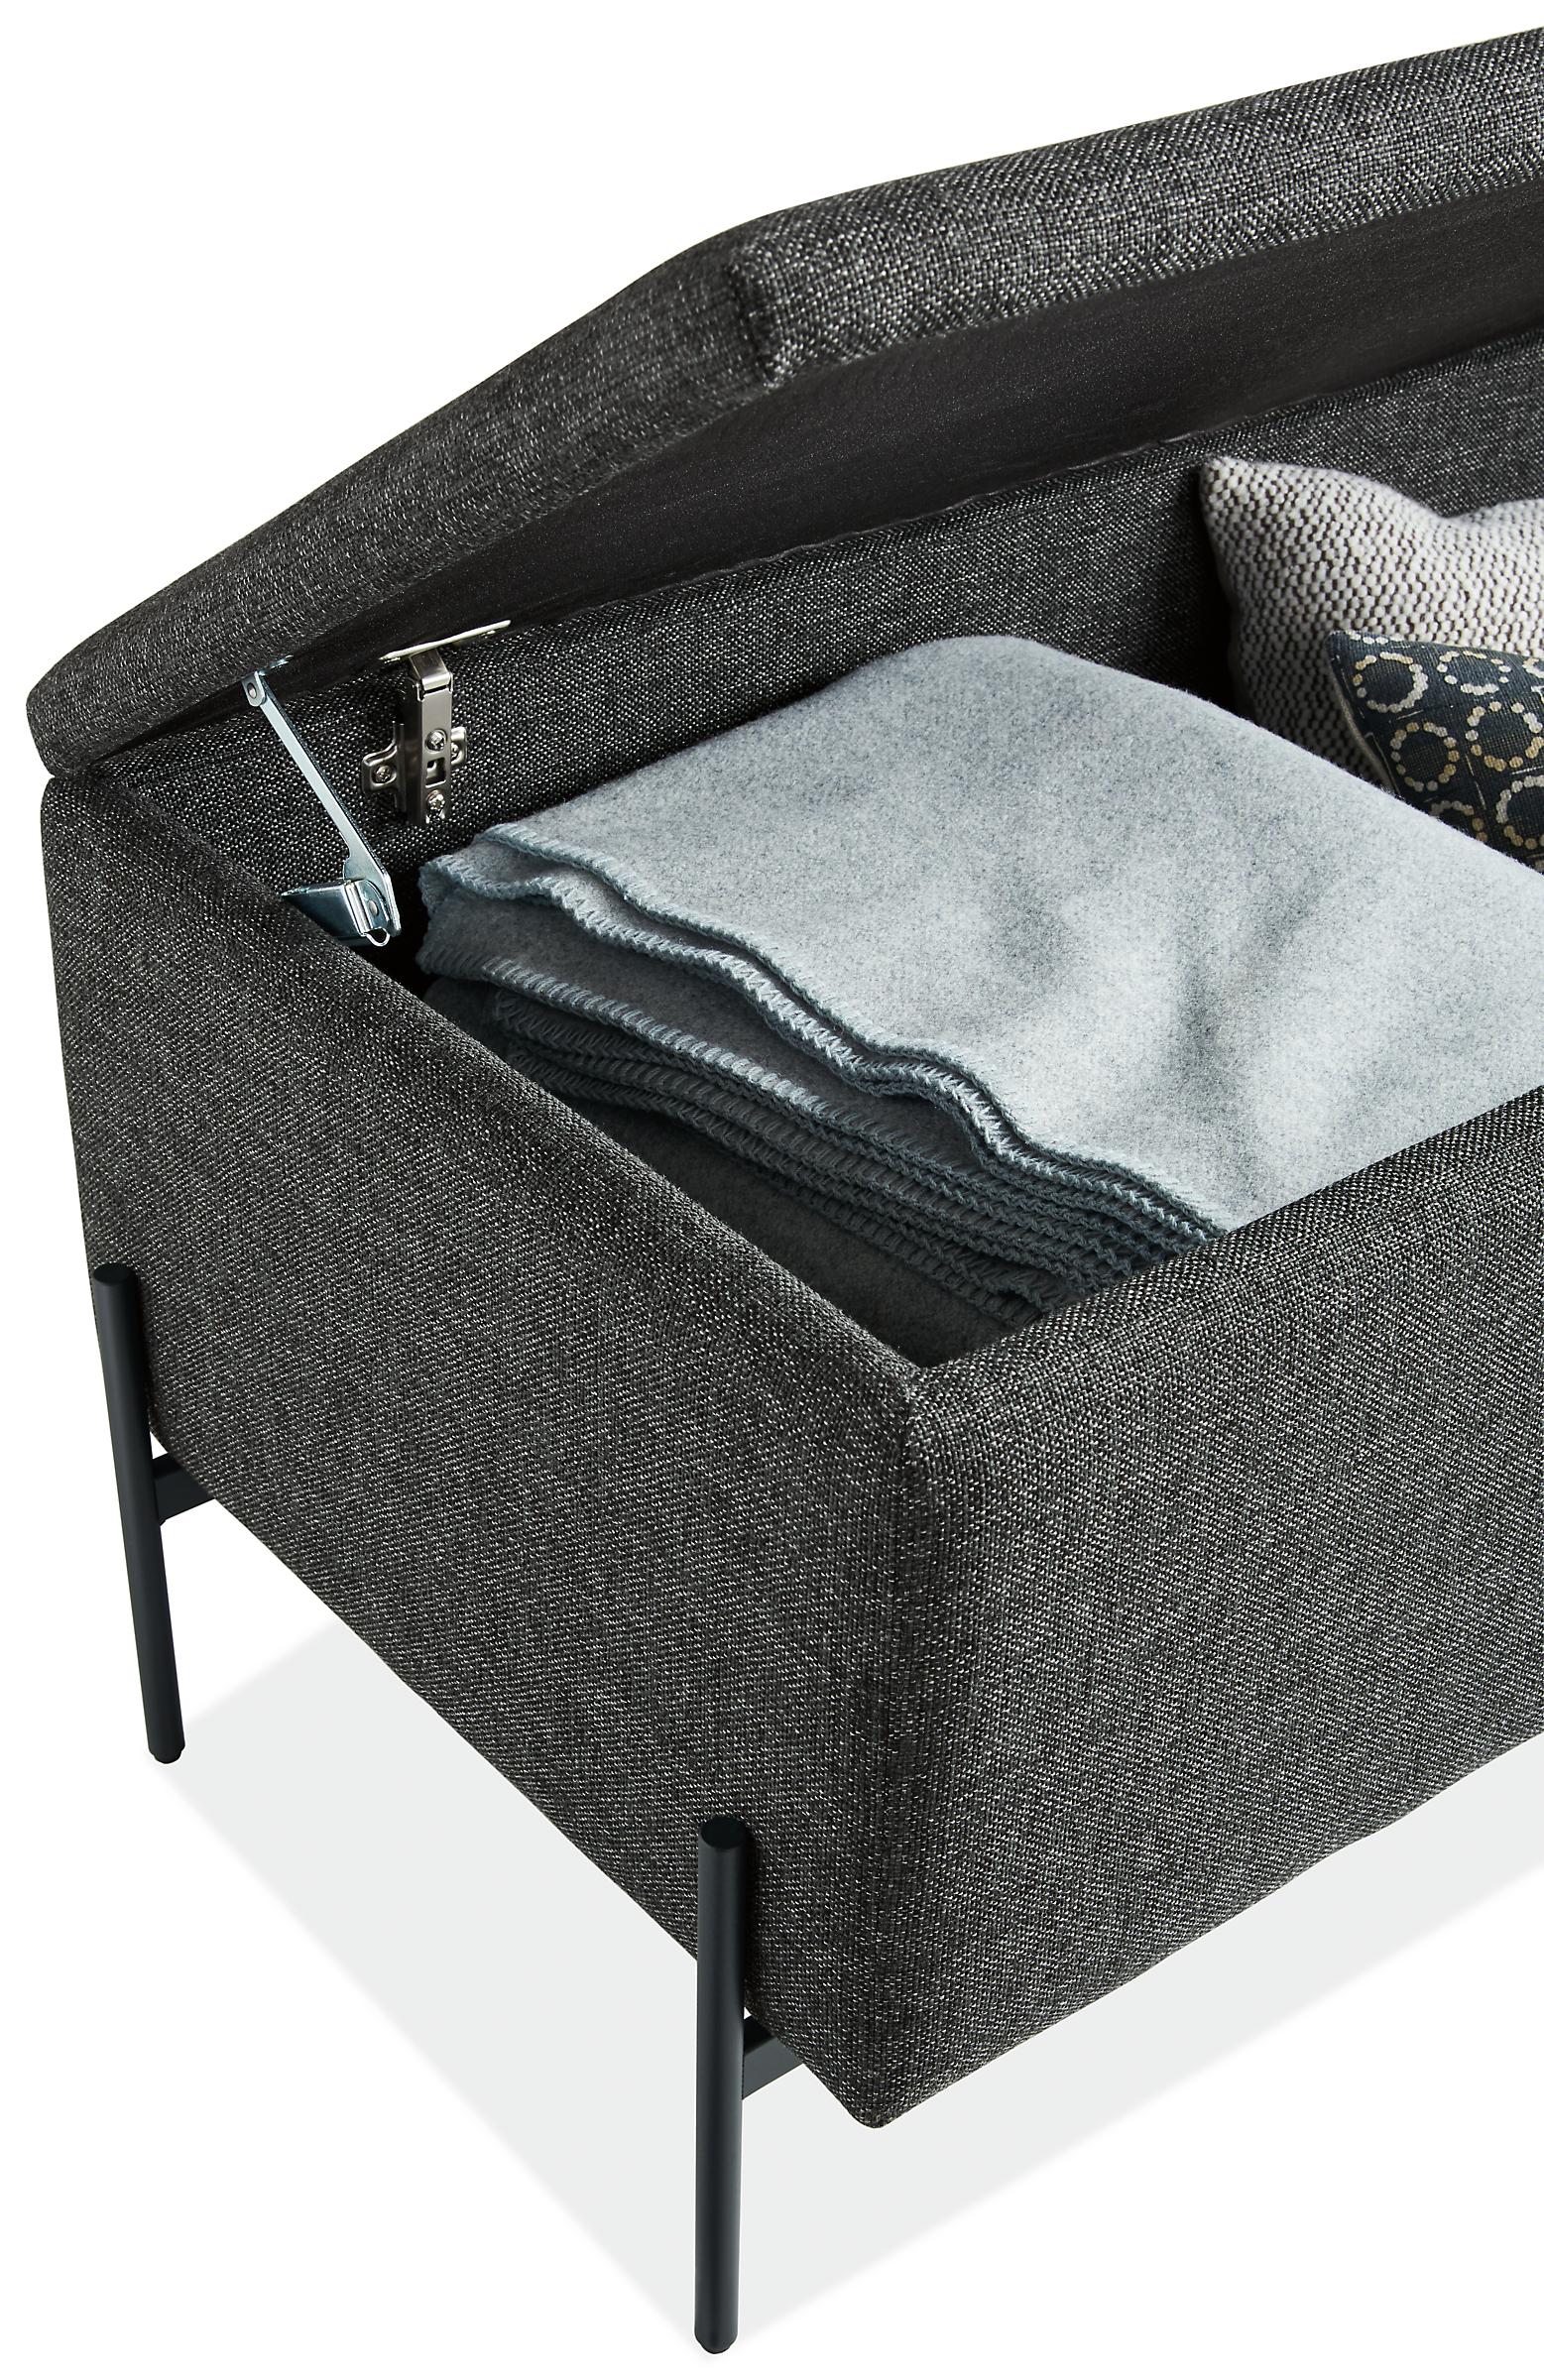 Detail of Paxton 54w 20d 18h Storage Ottoman in Sumner Fabric.